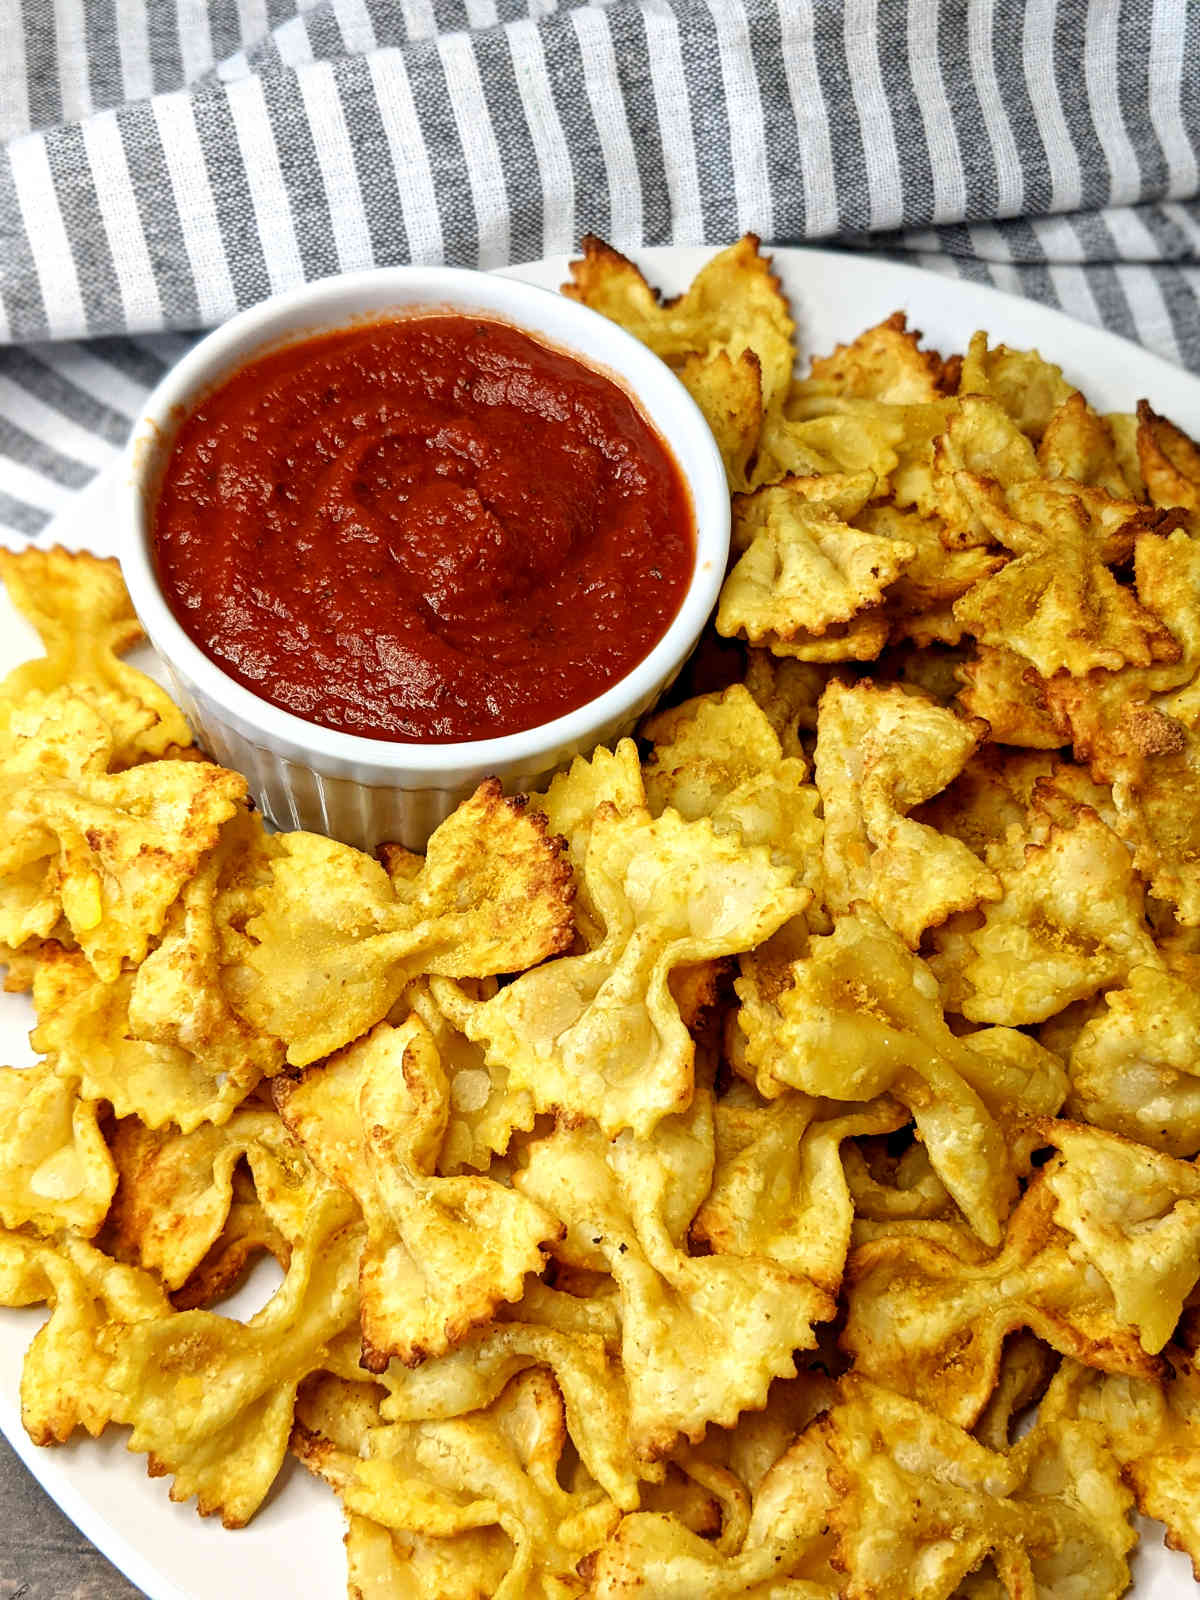 Pasta chips on a plate with a cup of marinara sauce.